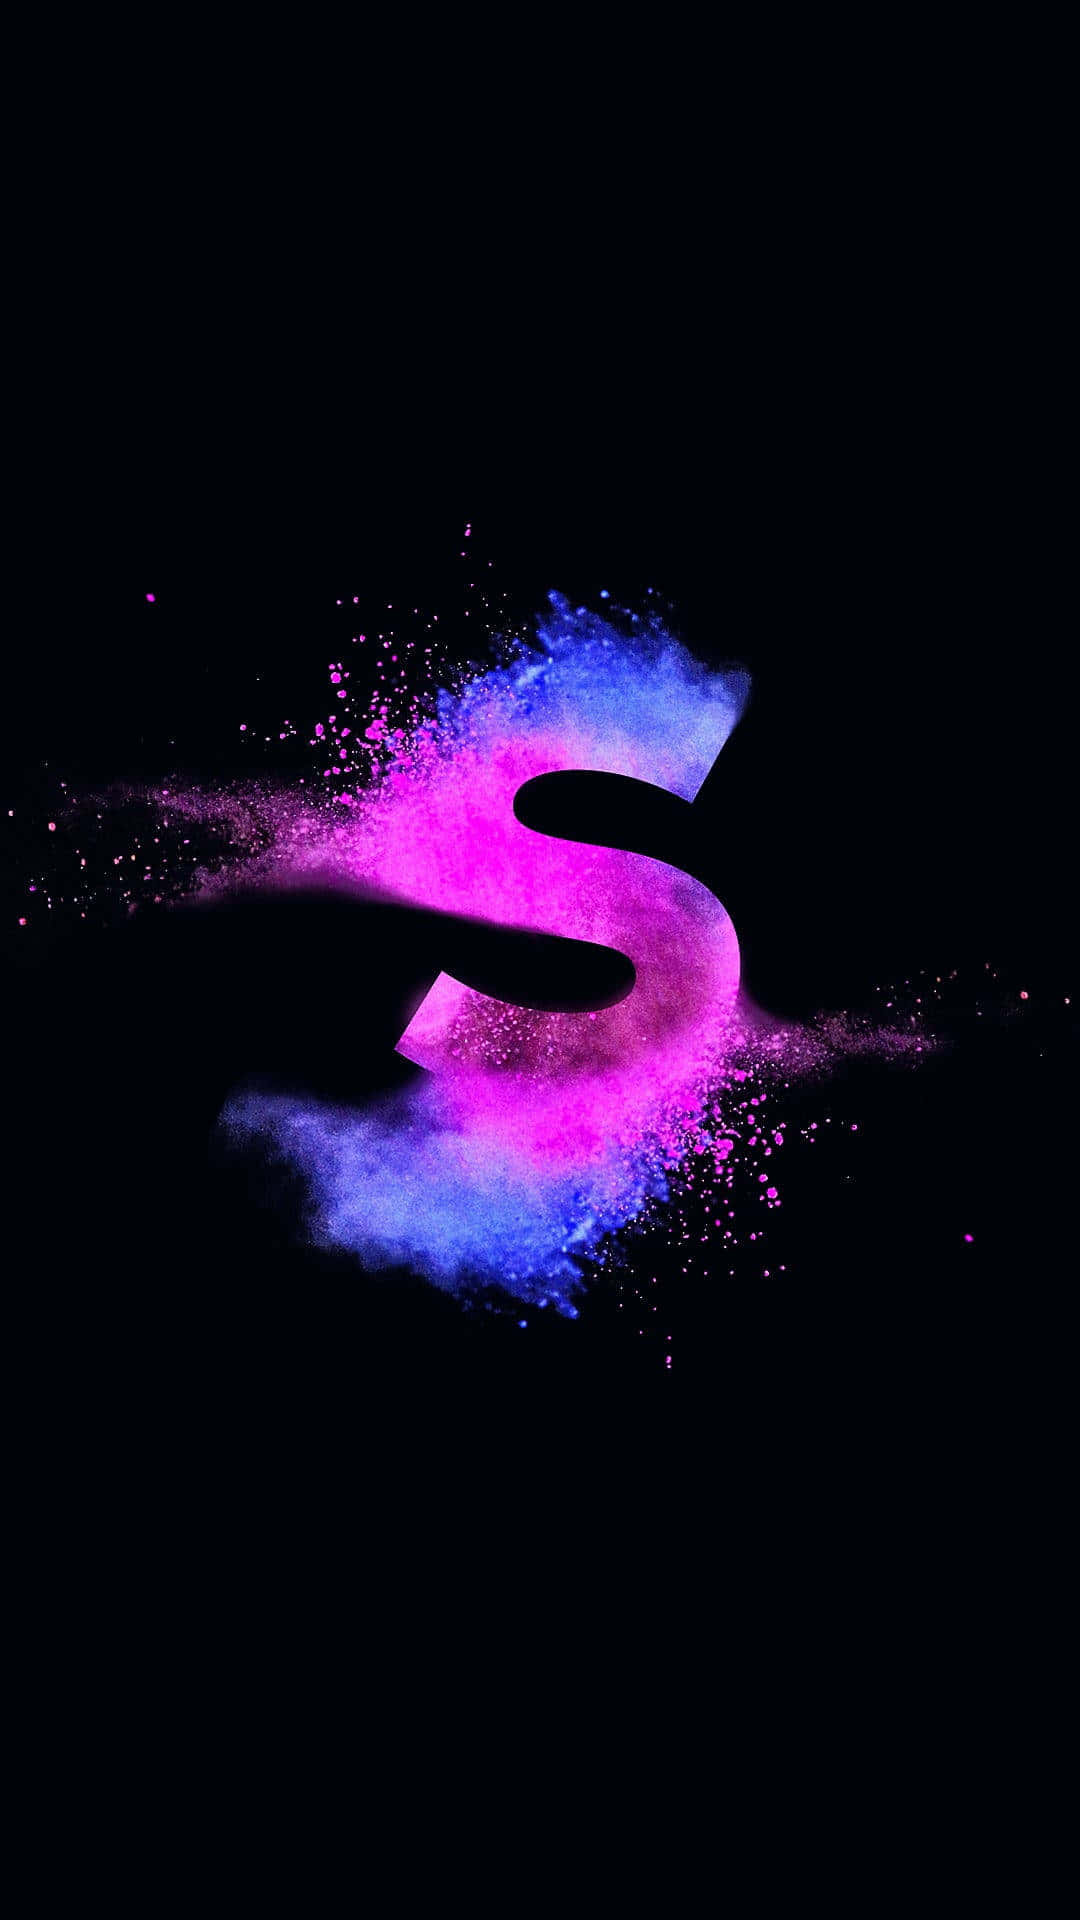 "S" for success in your business